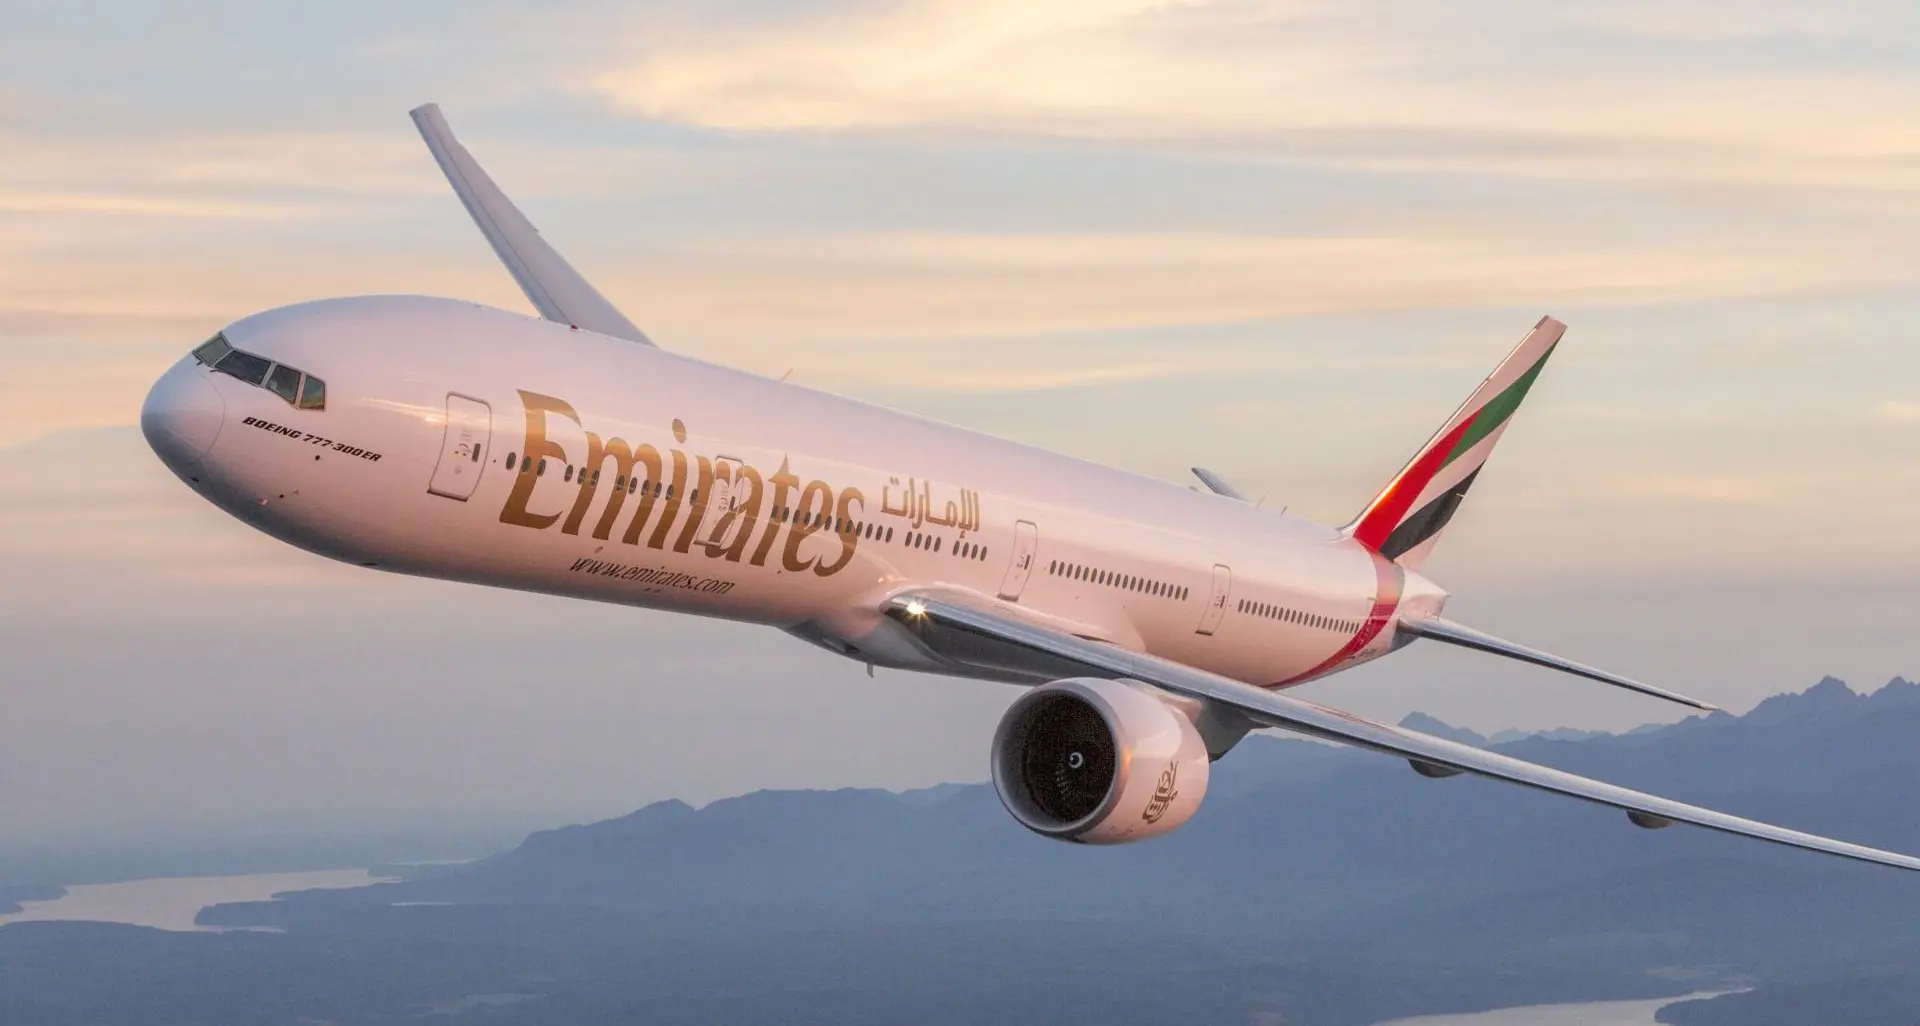 Emirates to operate commercial flights to repatriate expats to Philippines